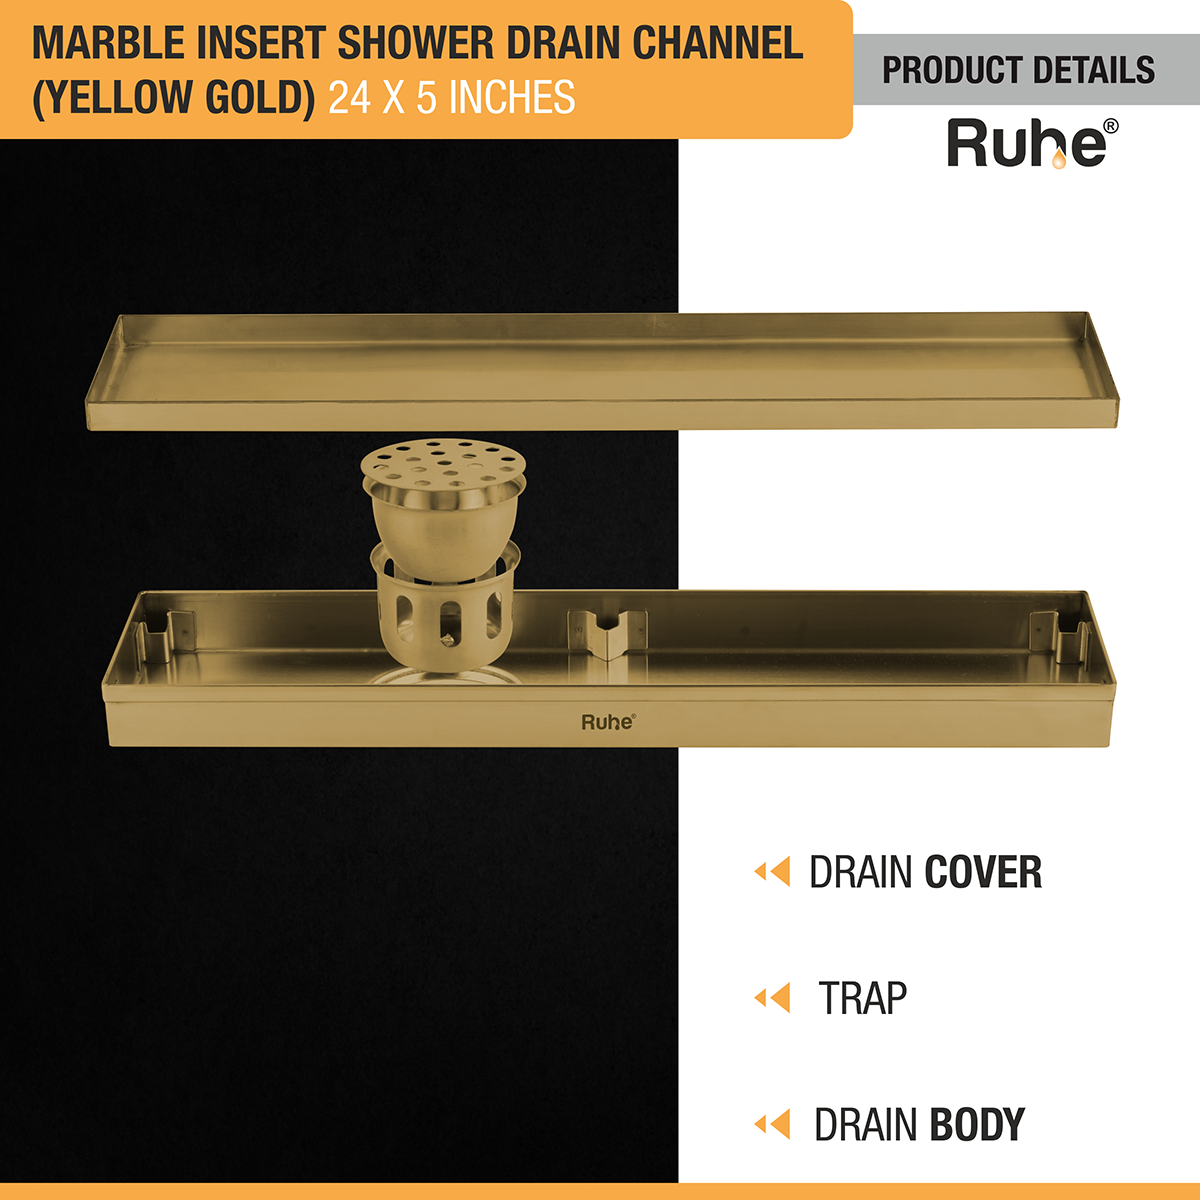 Marble Insert Shower Drain Channel (24 x 5 Inches) YELLOW GOLD PVD Coated with drain cover, trap, and drain body